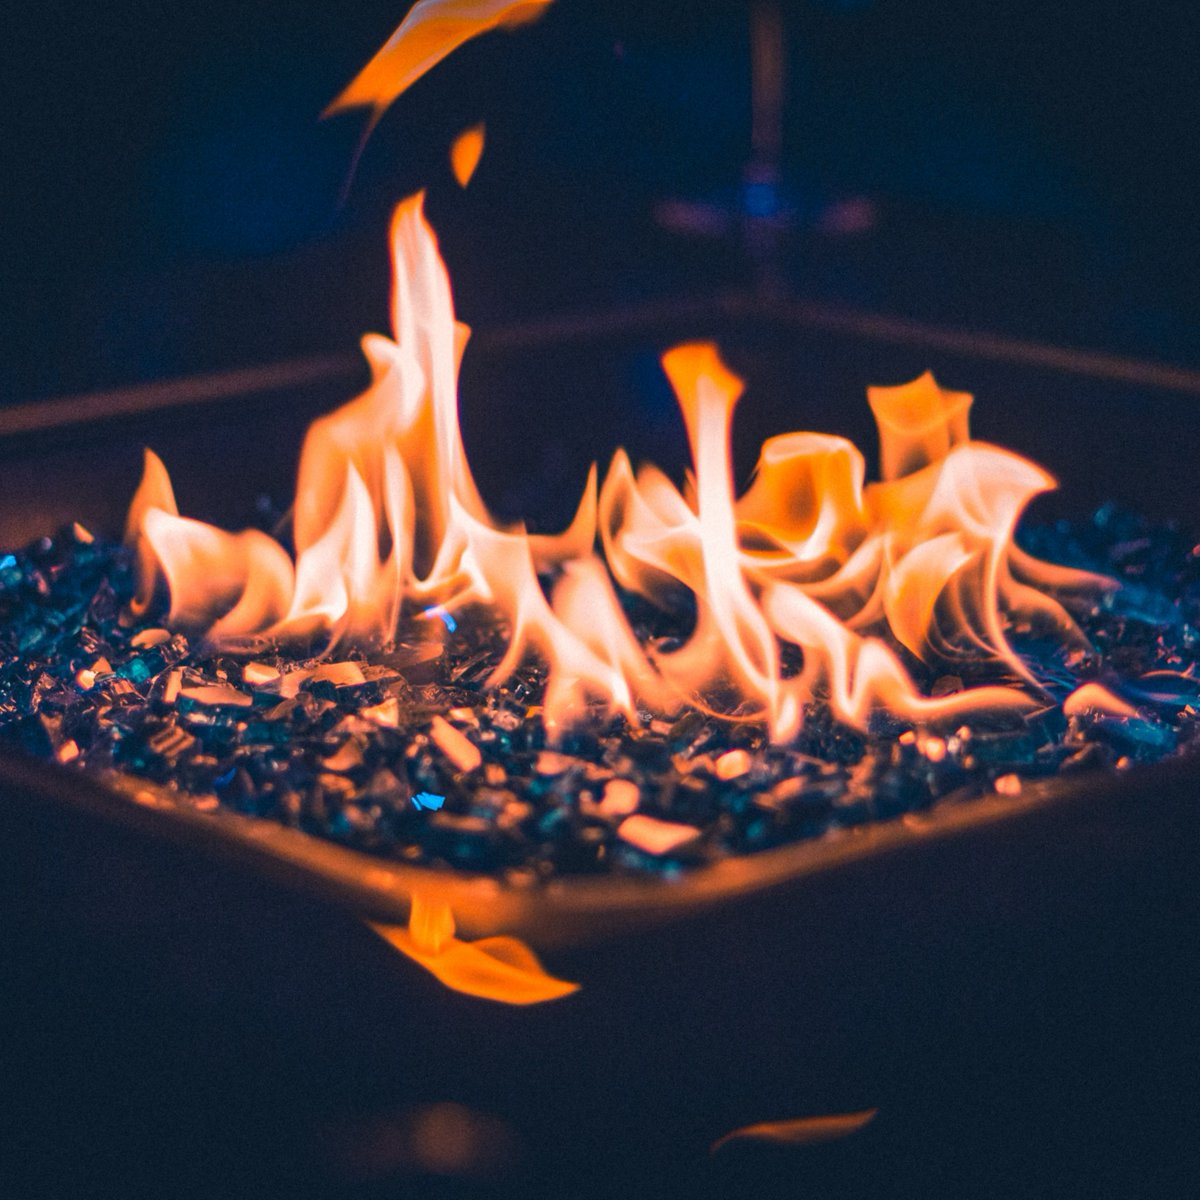 We now have FIRE PITS on our patio on weekends!!! 🔥

Come enjoy the sun and stay warm by the flames (don't get too close!) before, during, or after a nice meal at 5th St. Who's in? 🙌

#yegwinterpatio #yegdt #yegfood